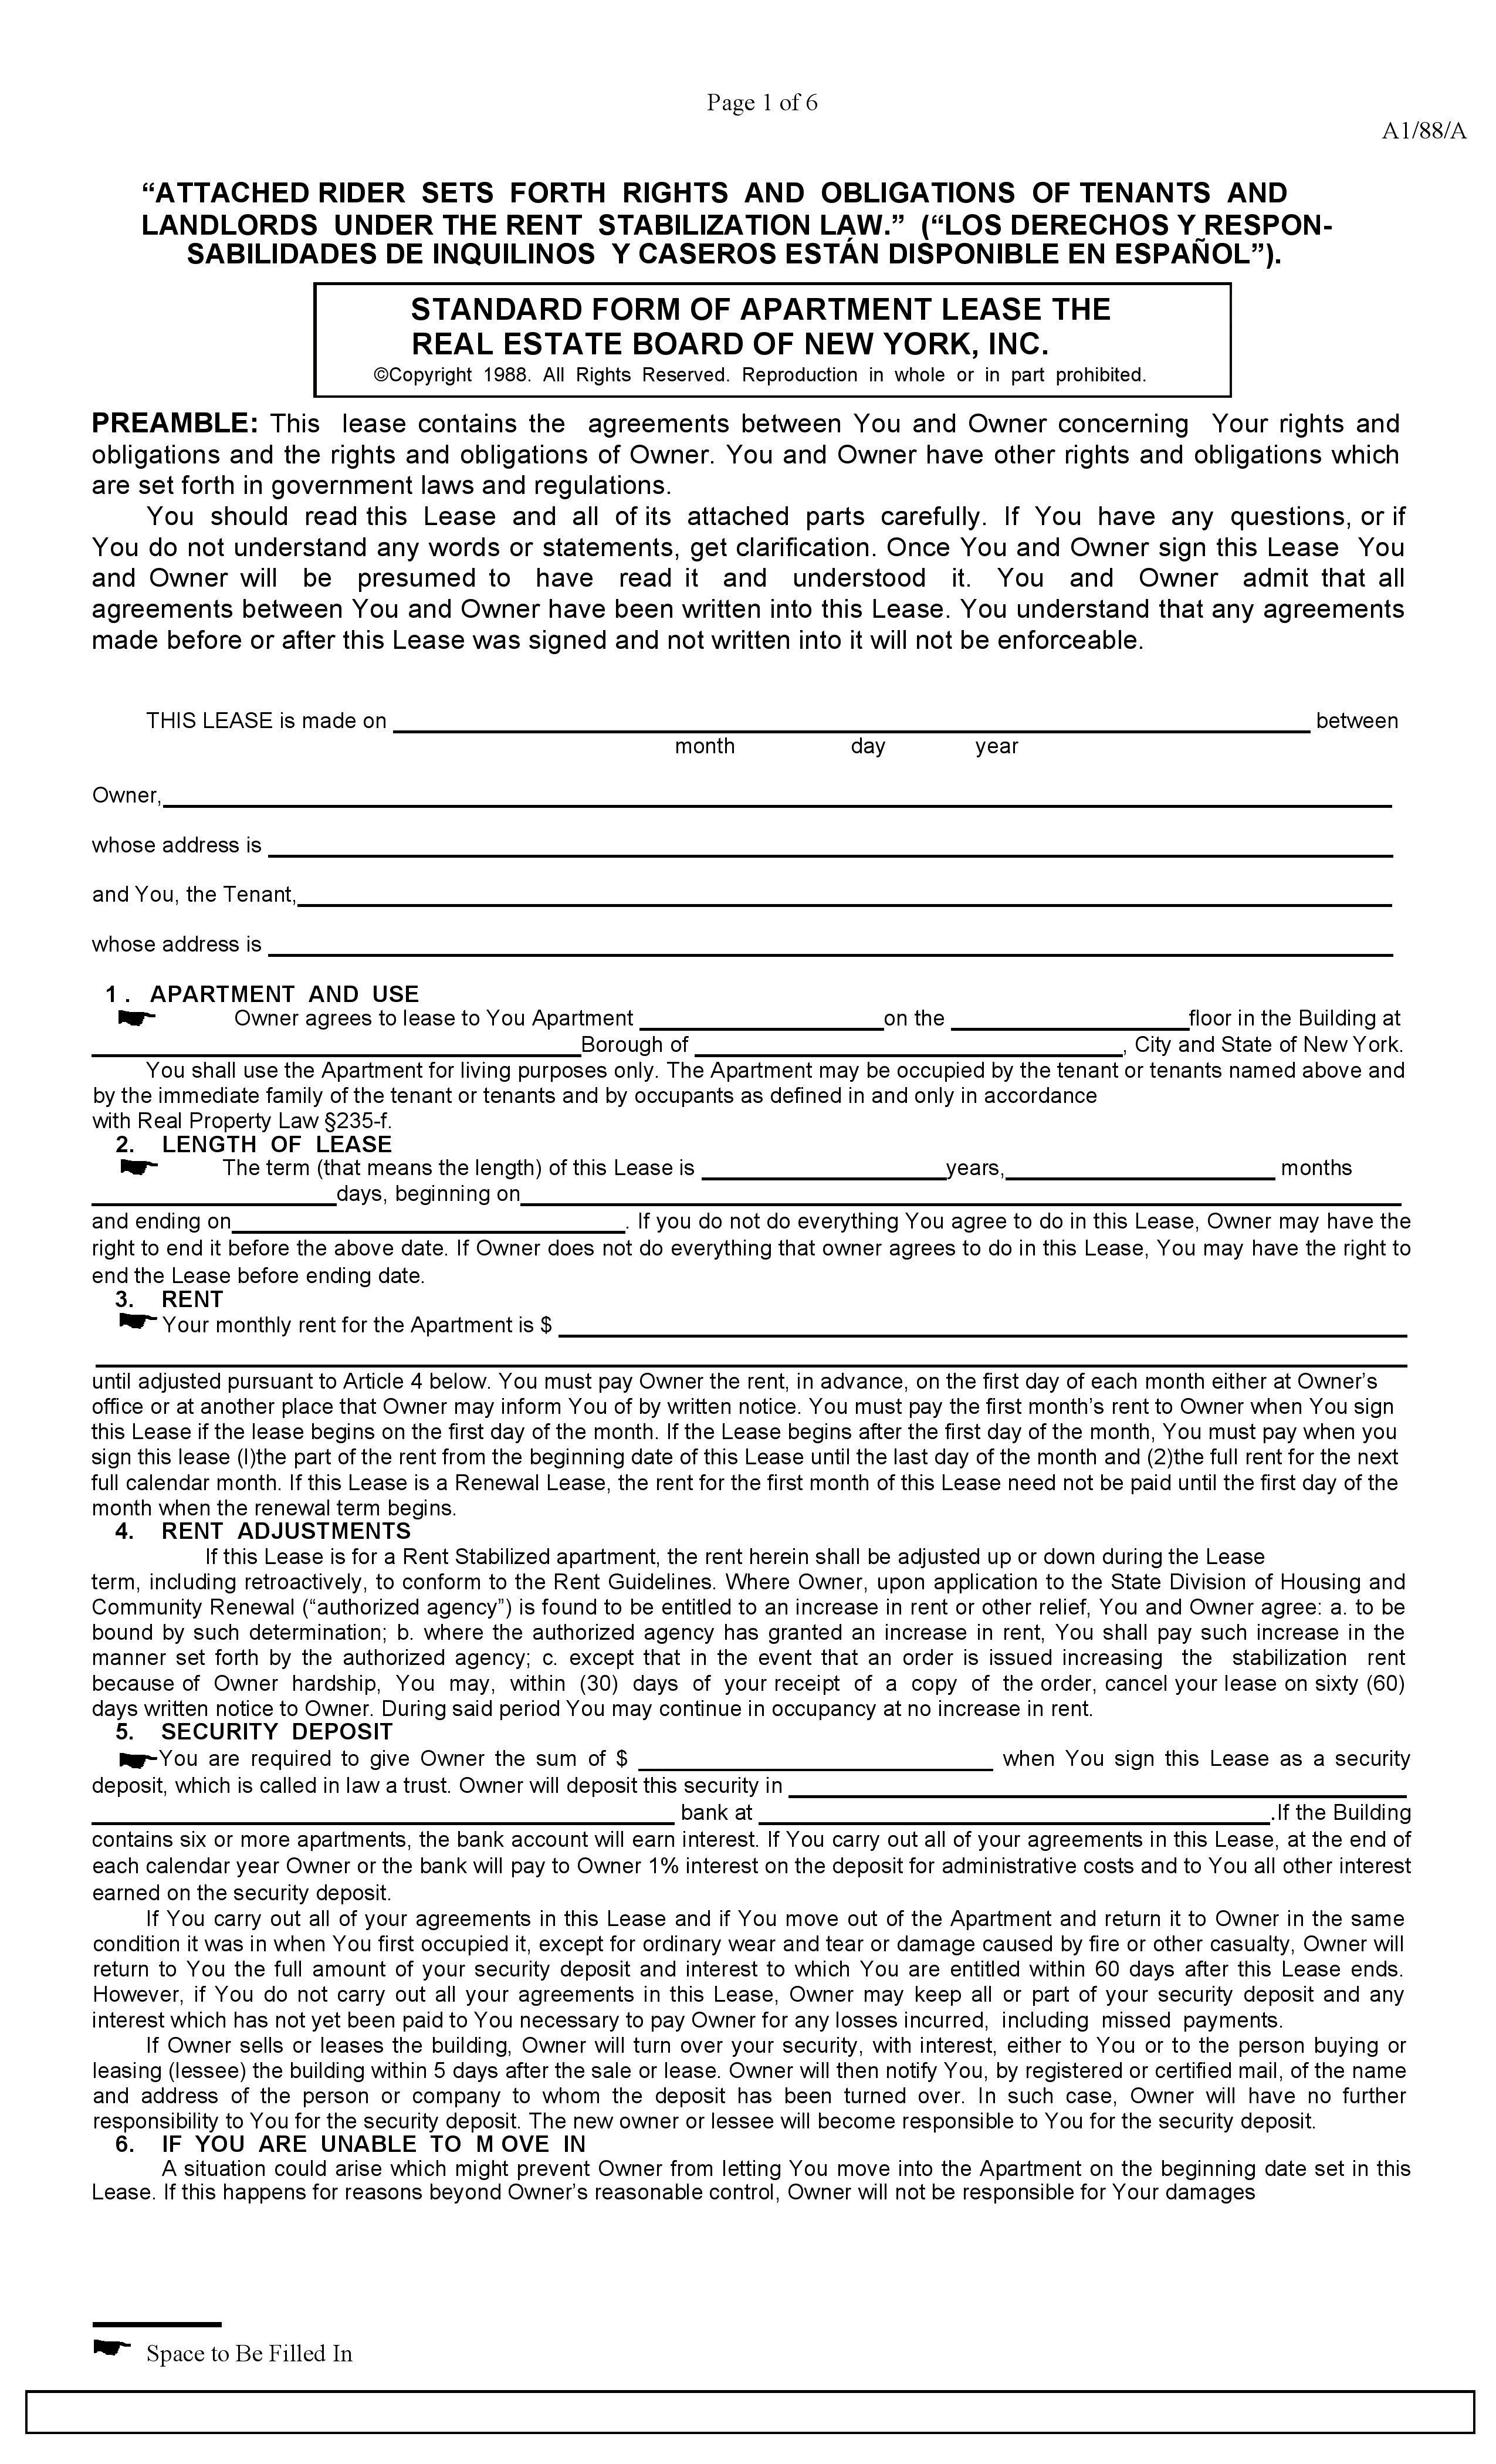 Download Free New York Standard Rental Lease Stabilized with Rider